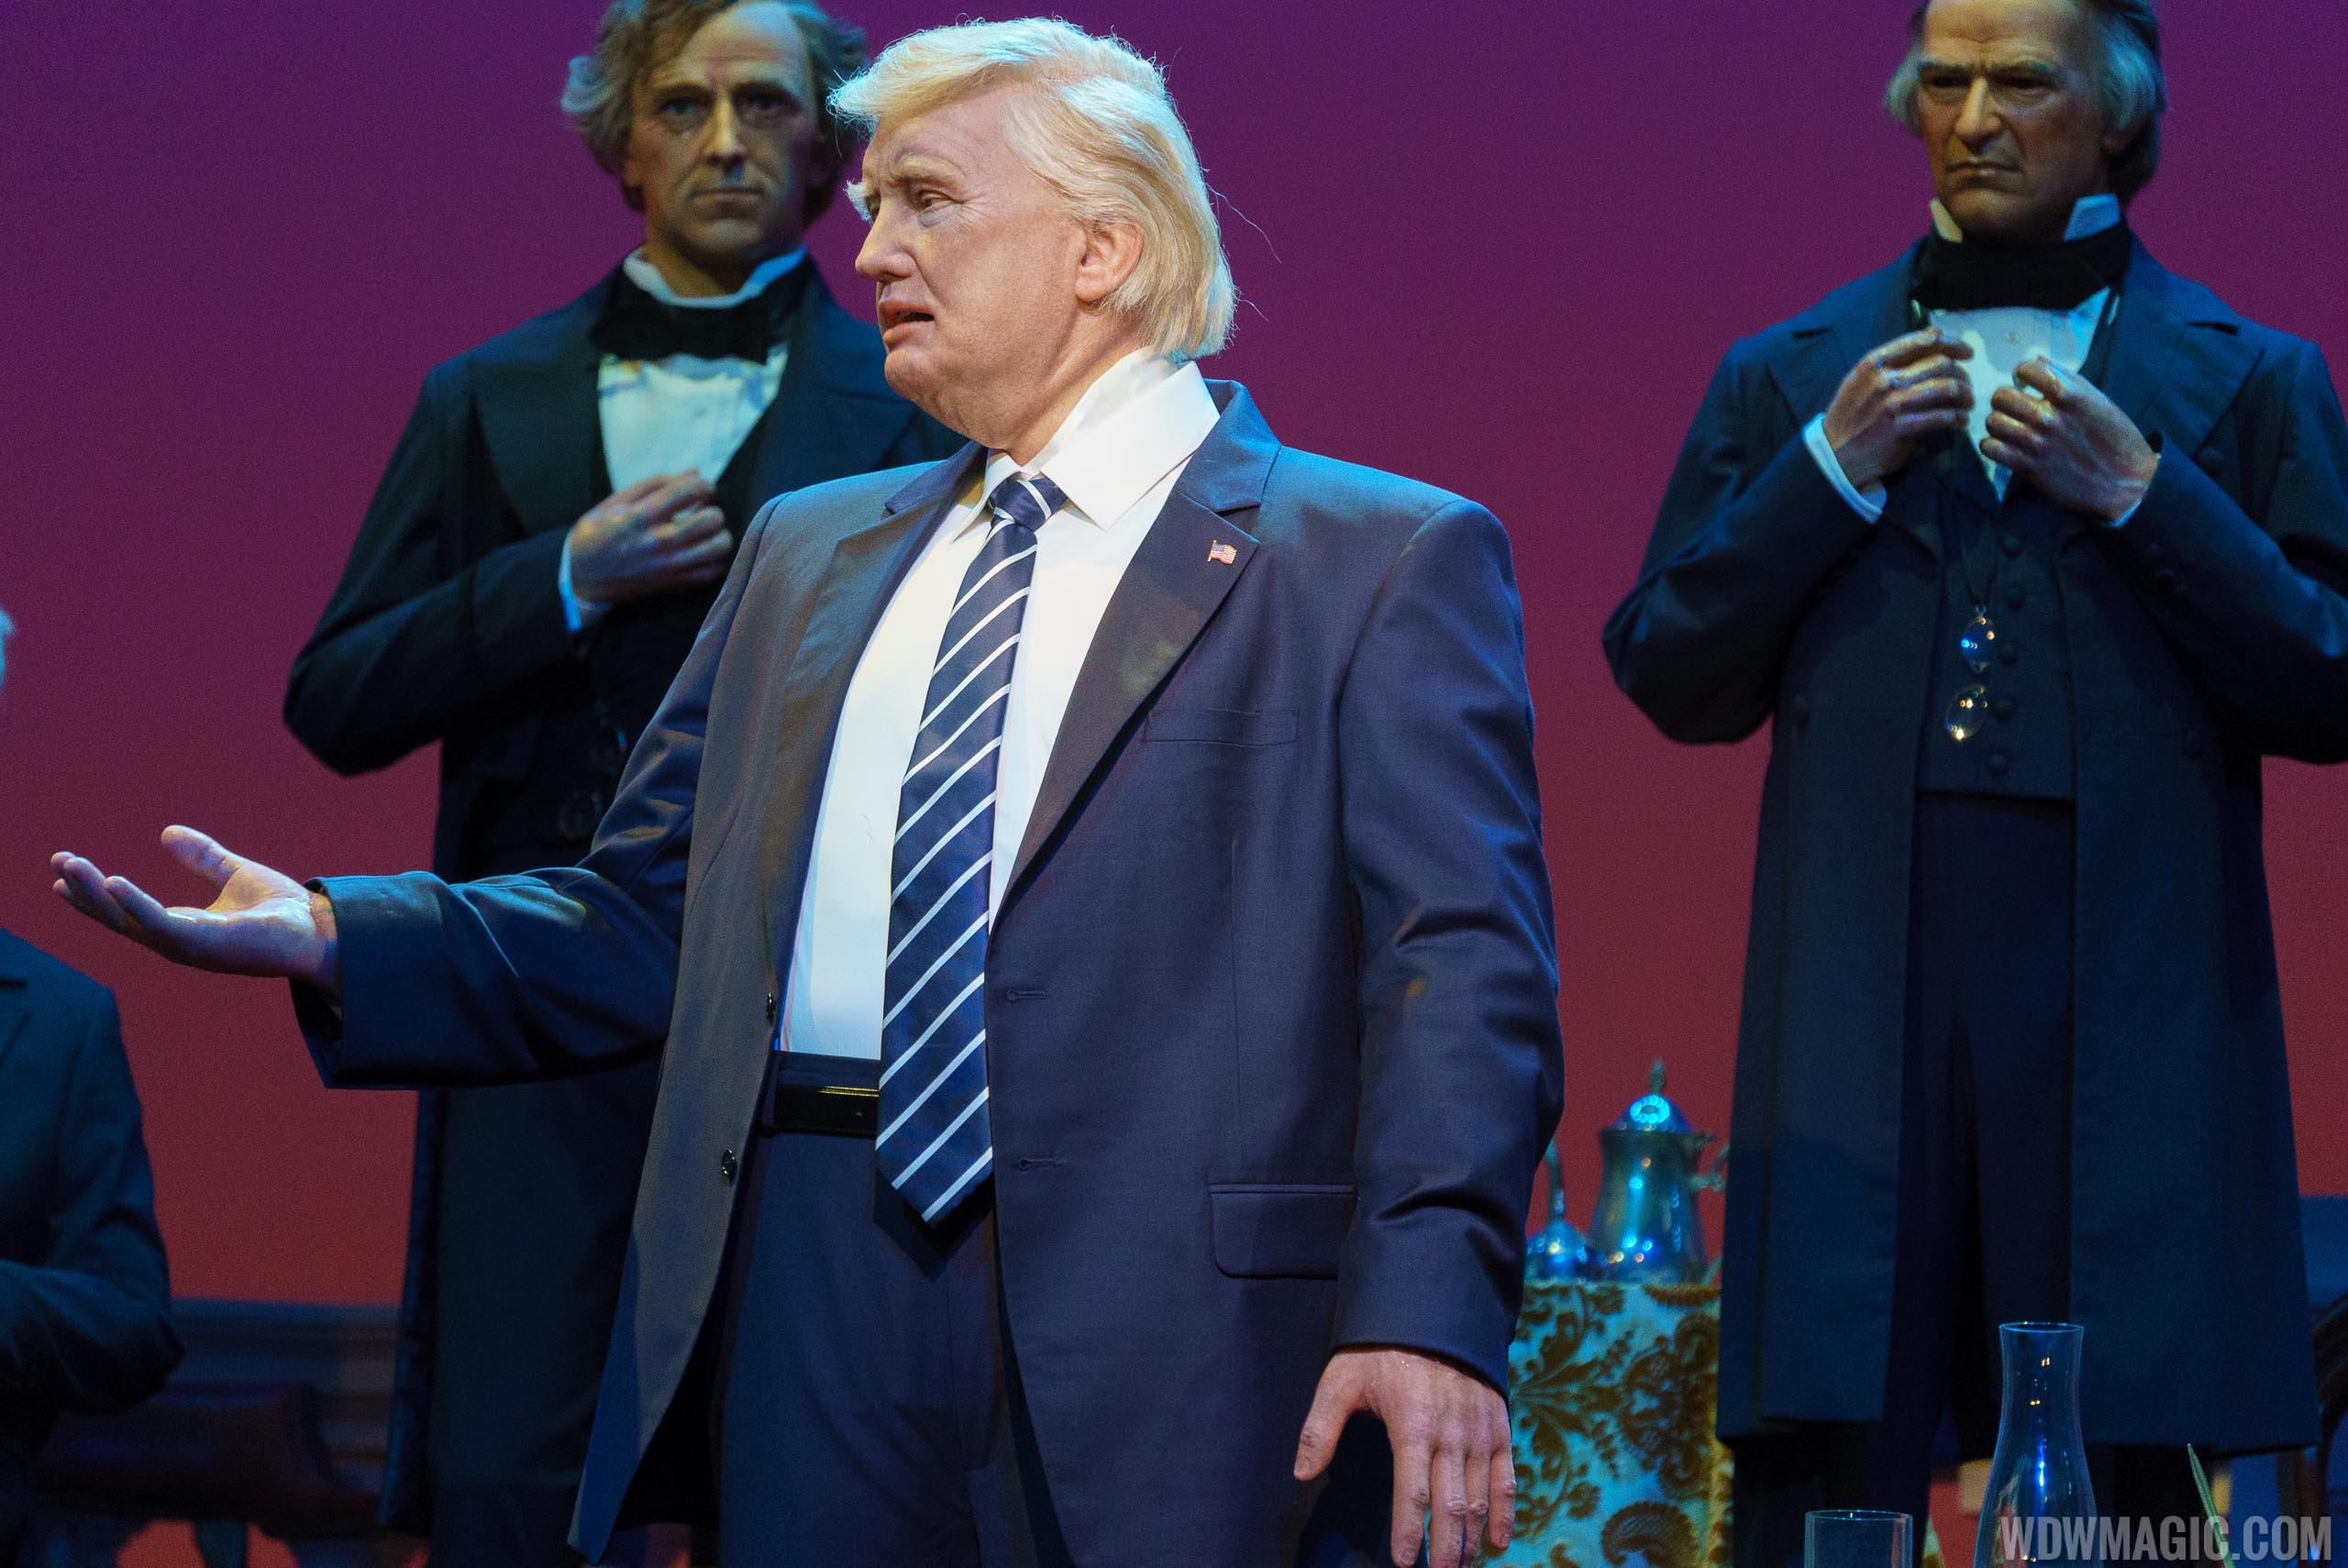 Image result for donald trump hall of presidents